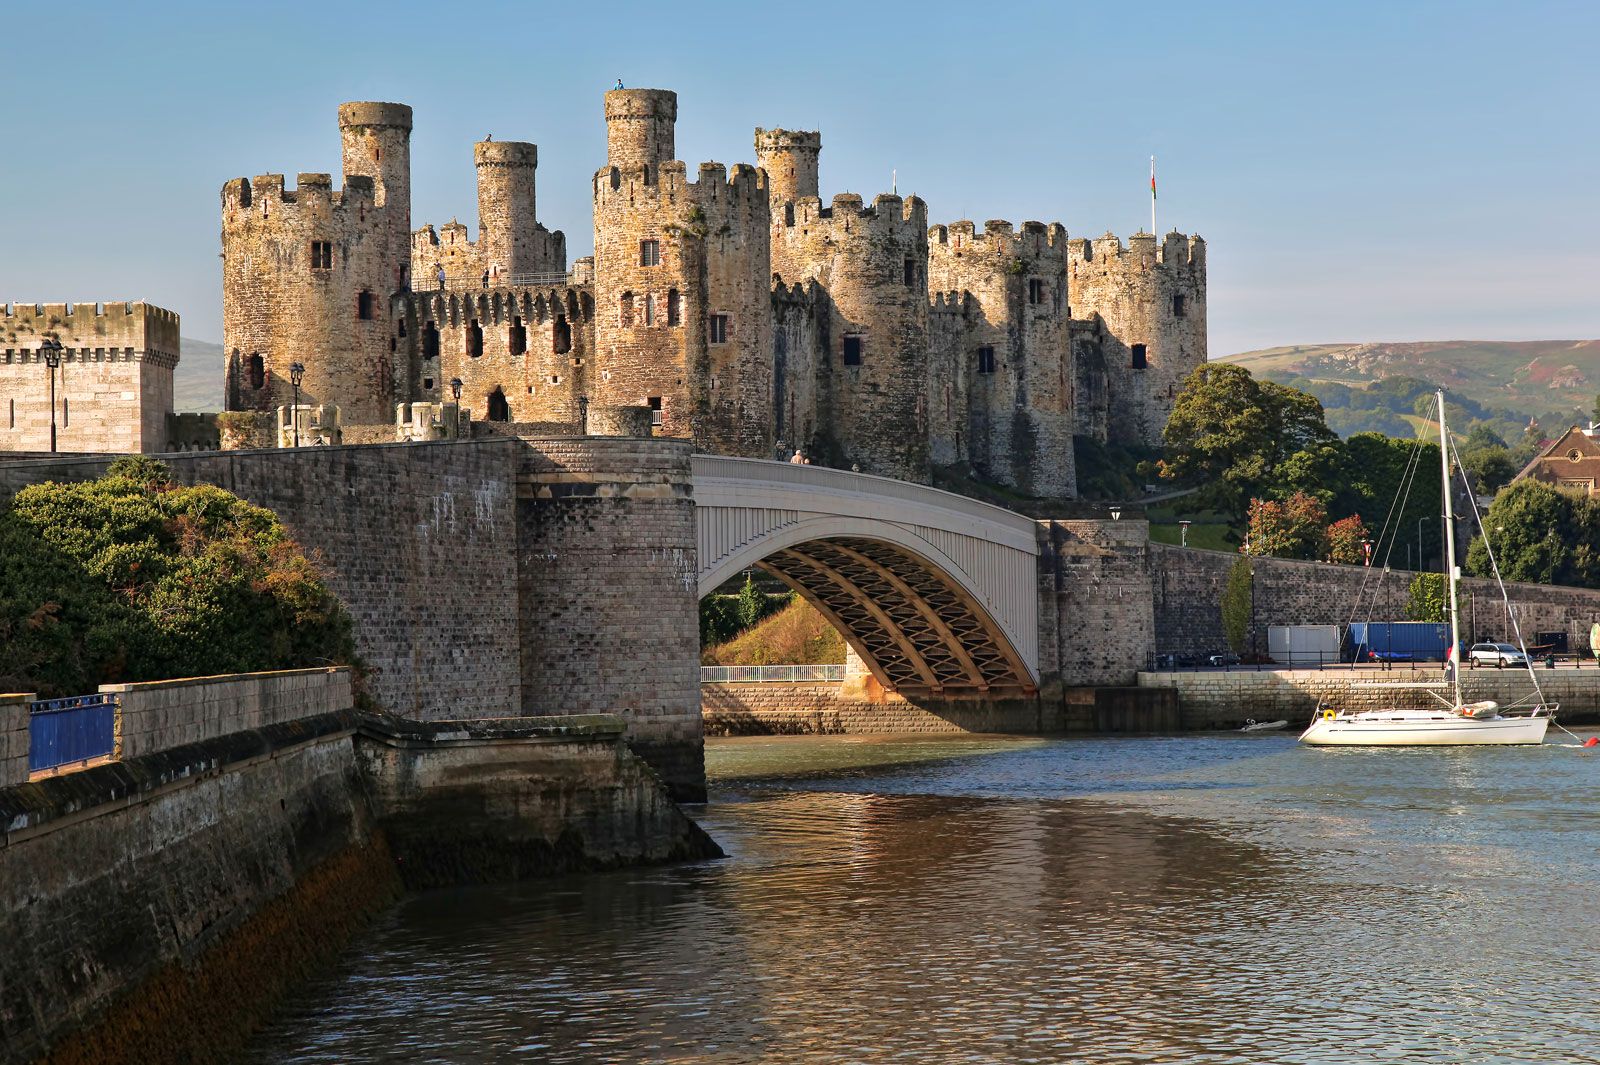 Giant brown bricked Conwy castle above the  river in the  wales